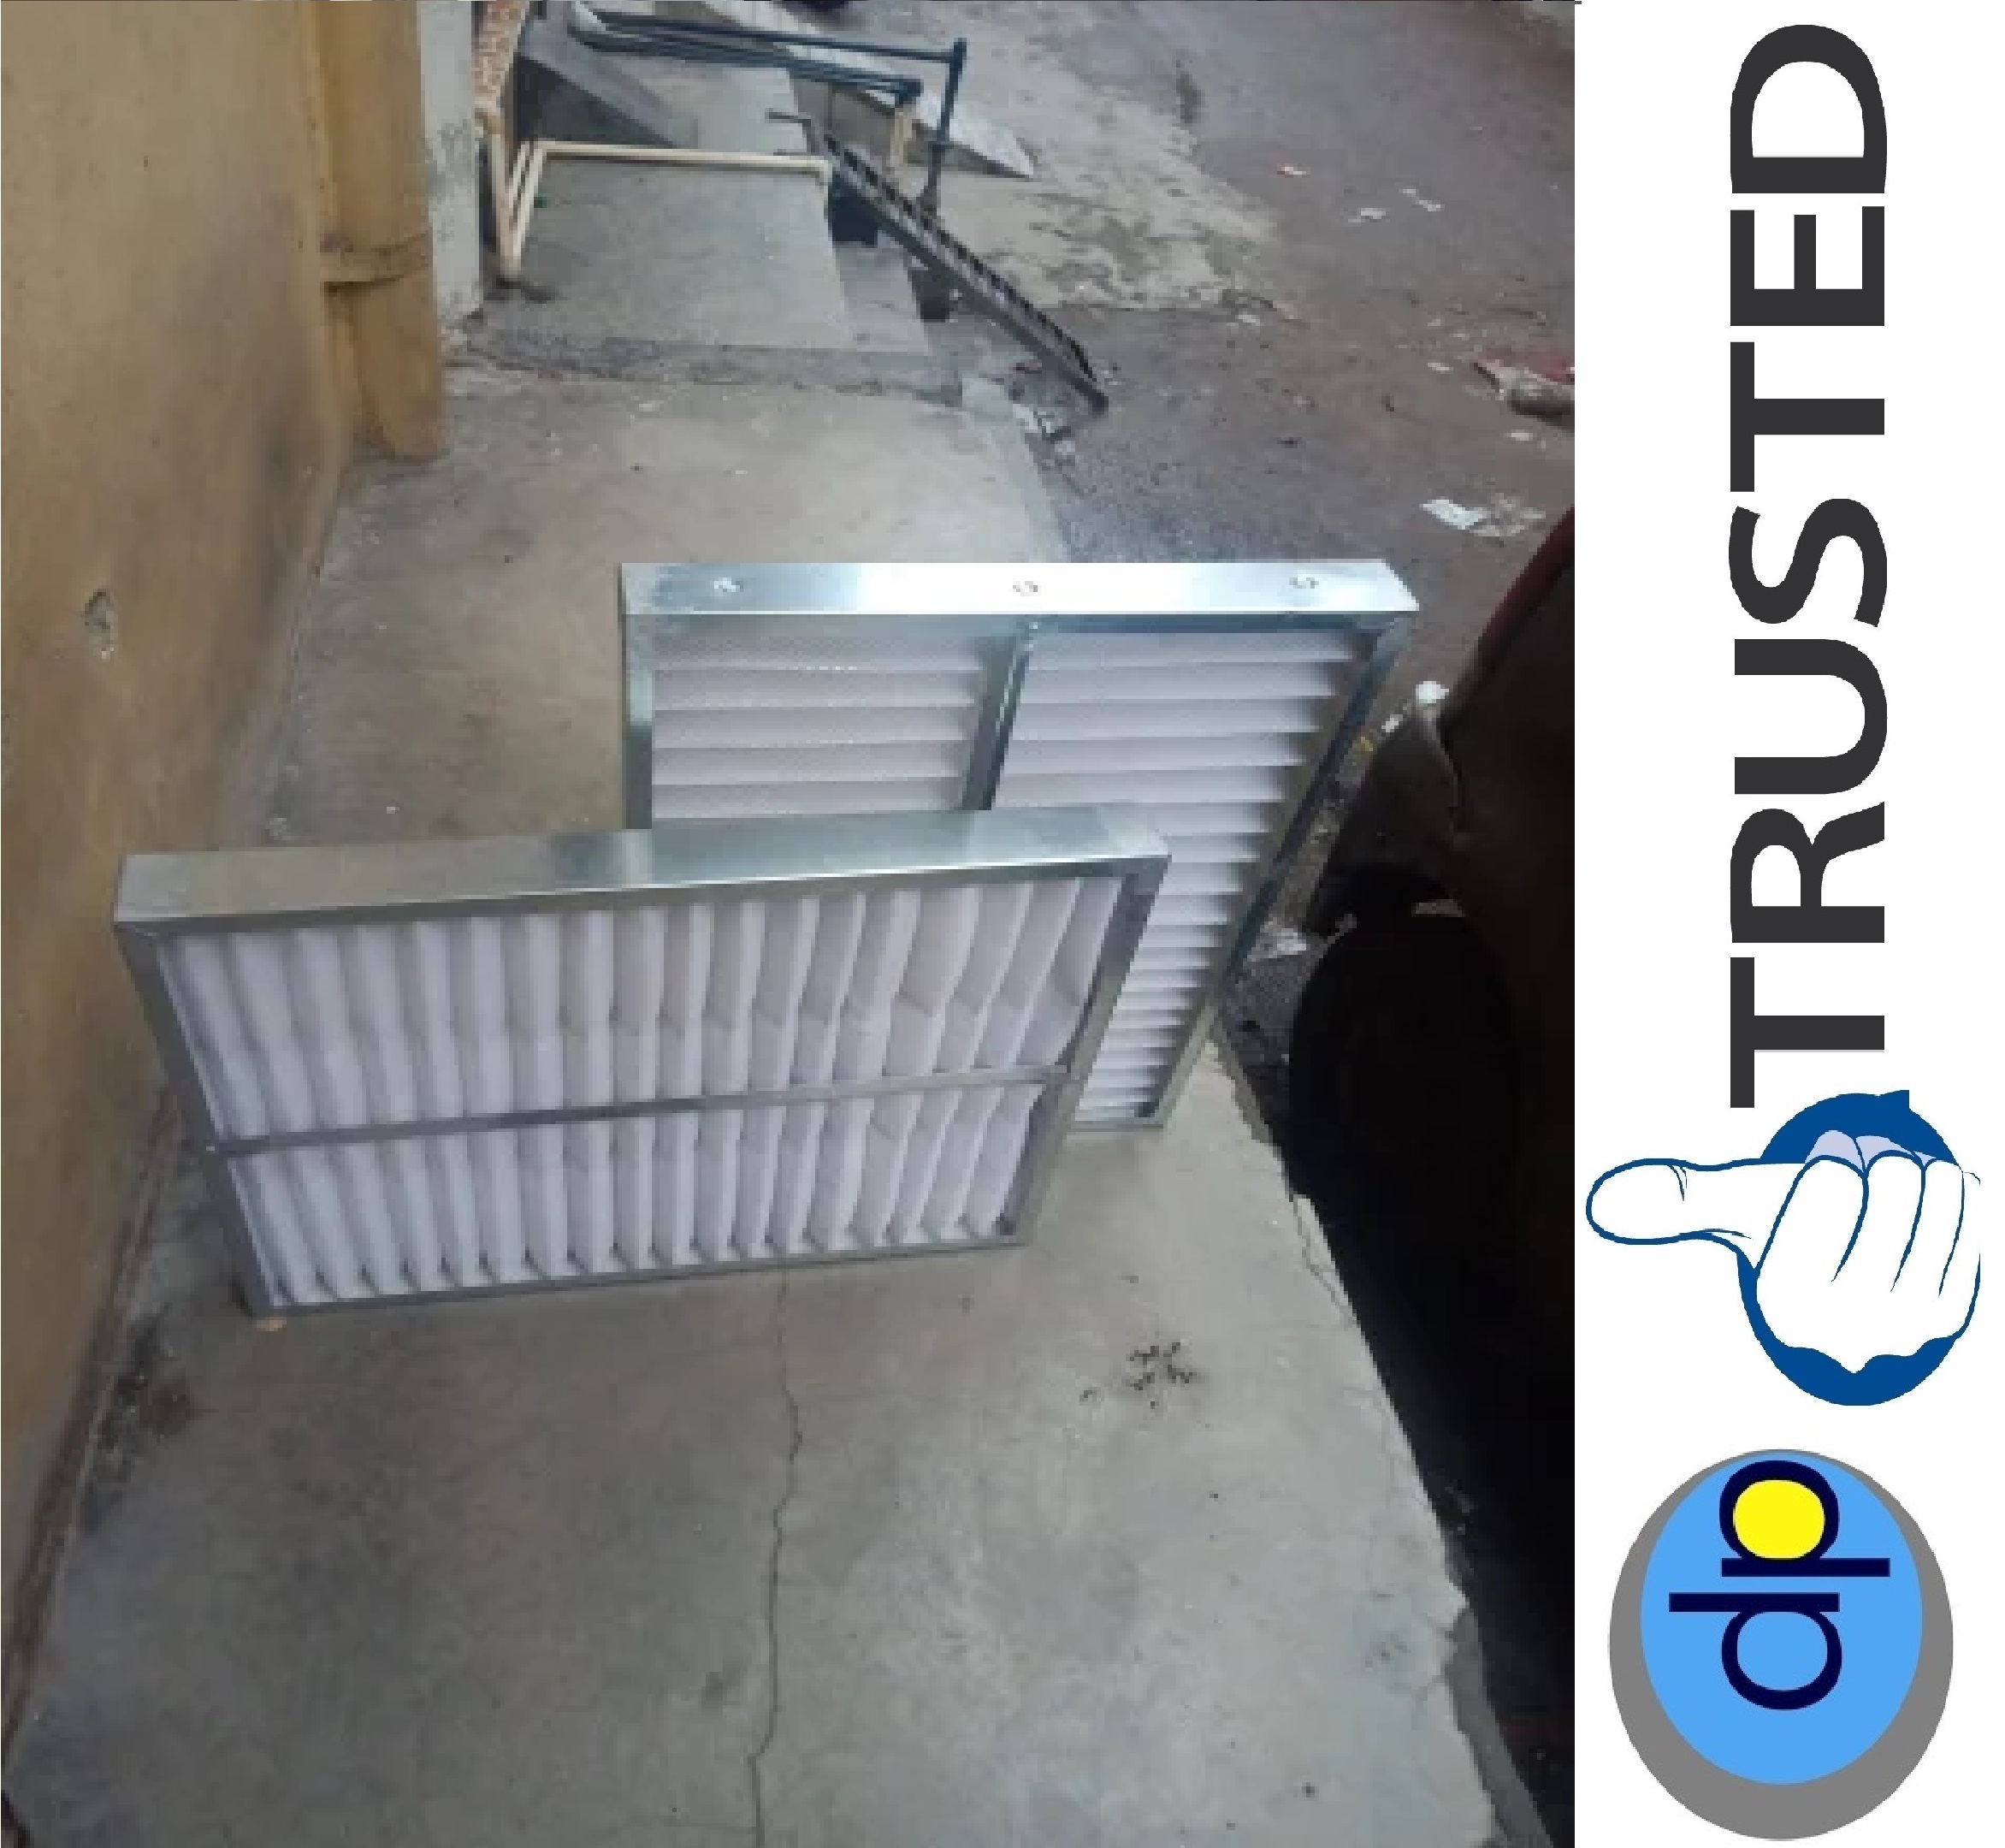 Leading Supplier of AHU (Air Handling Unit) Filters for Hyderabad Telangana